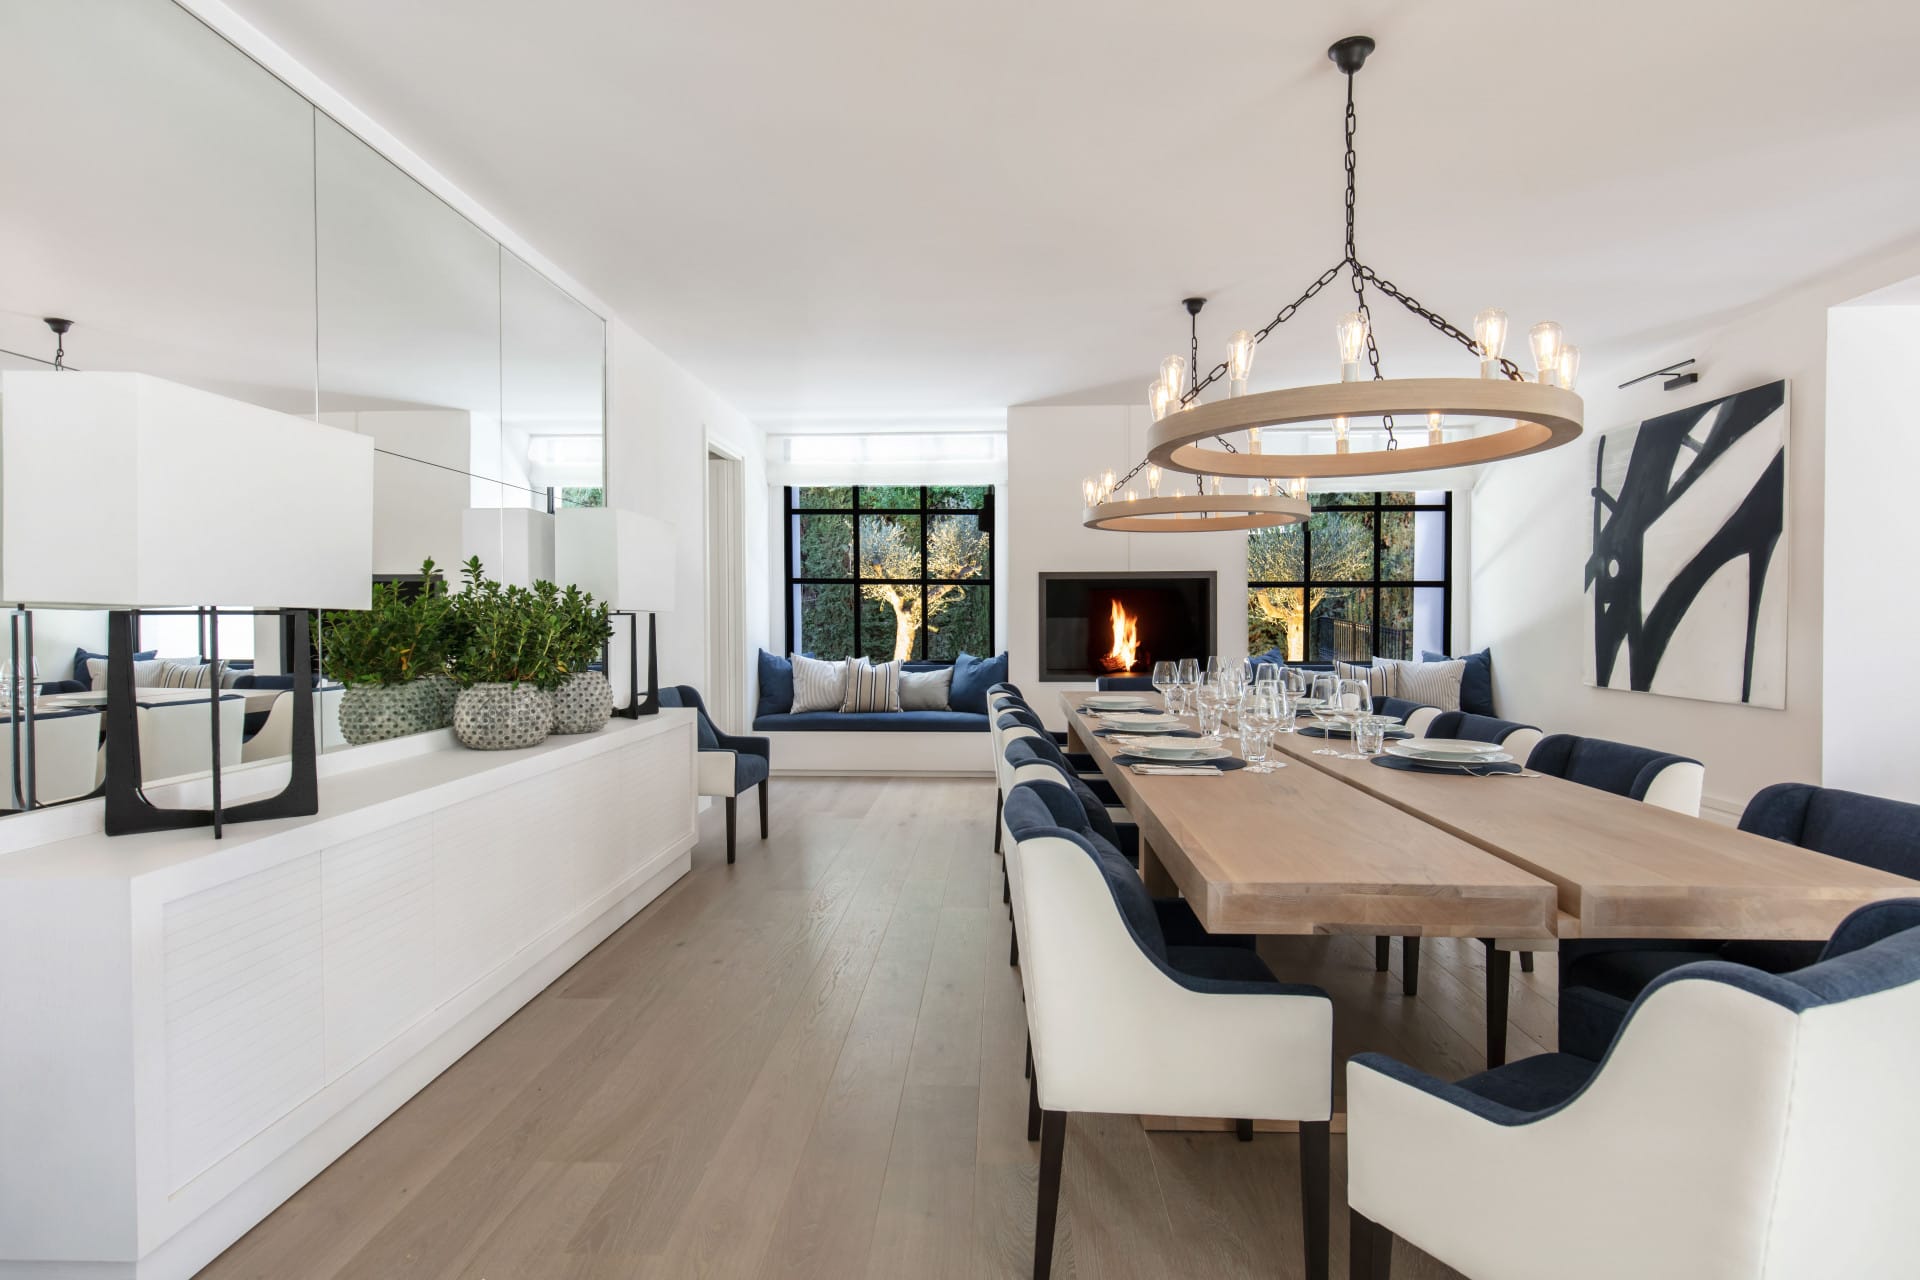 New architectural trends for Marbella in 2019